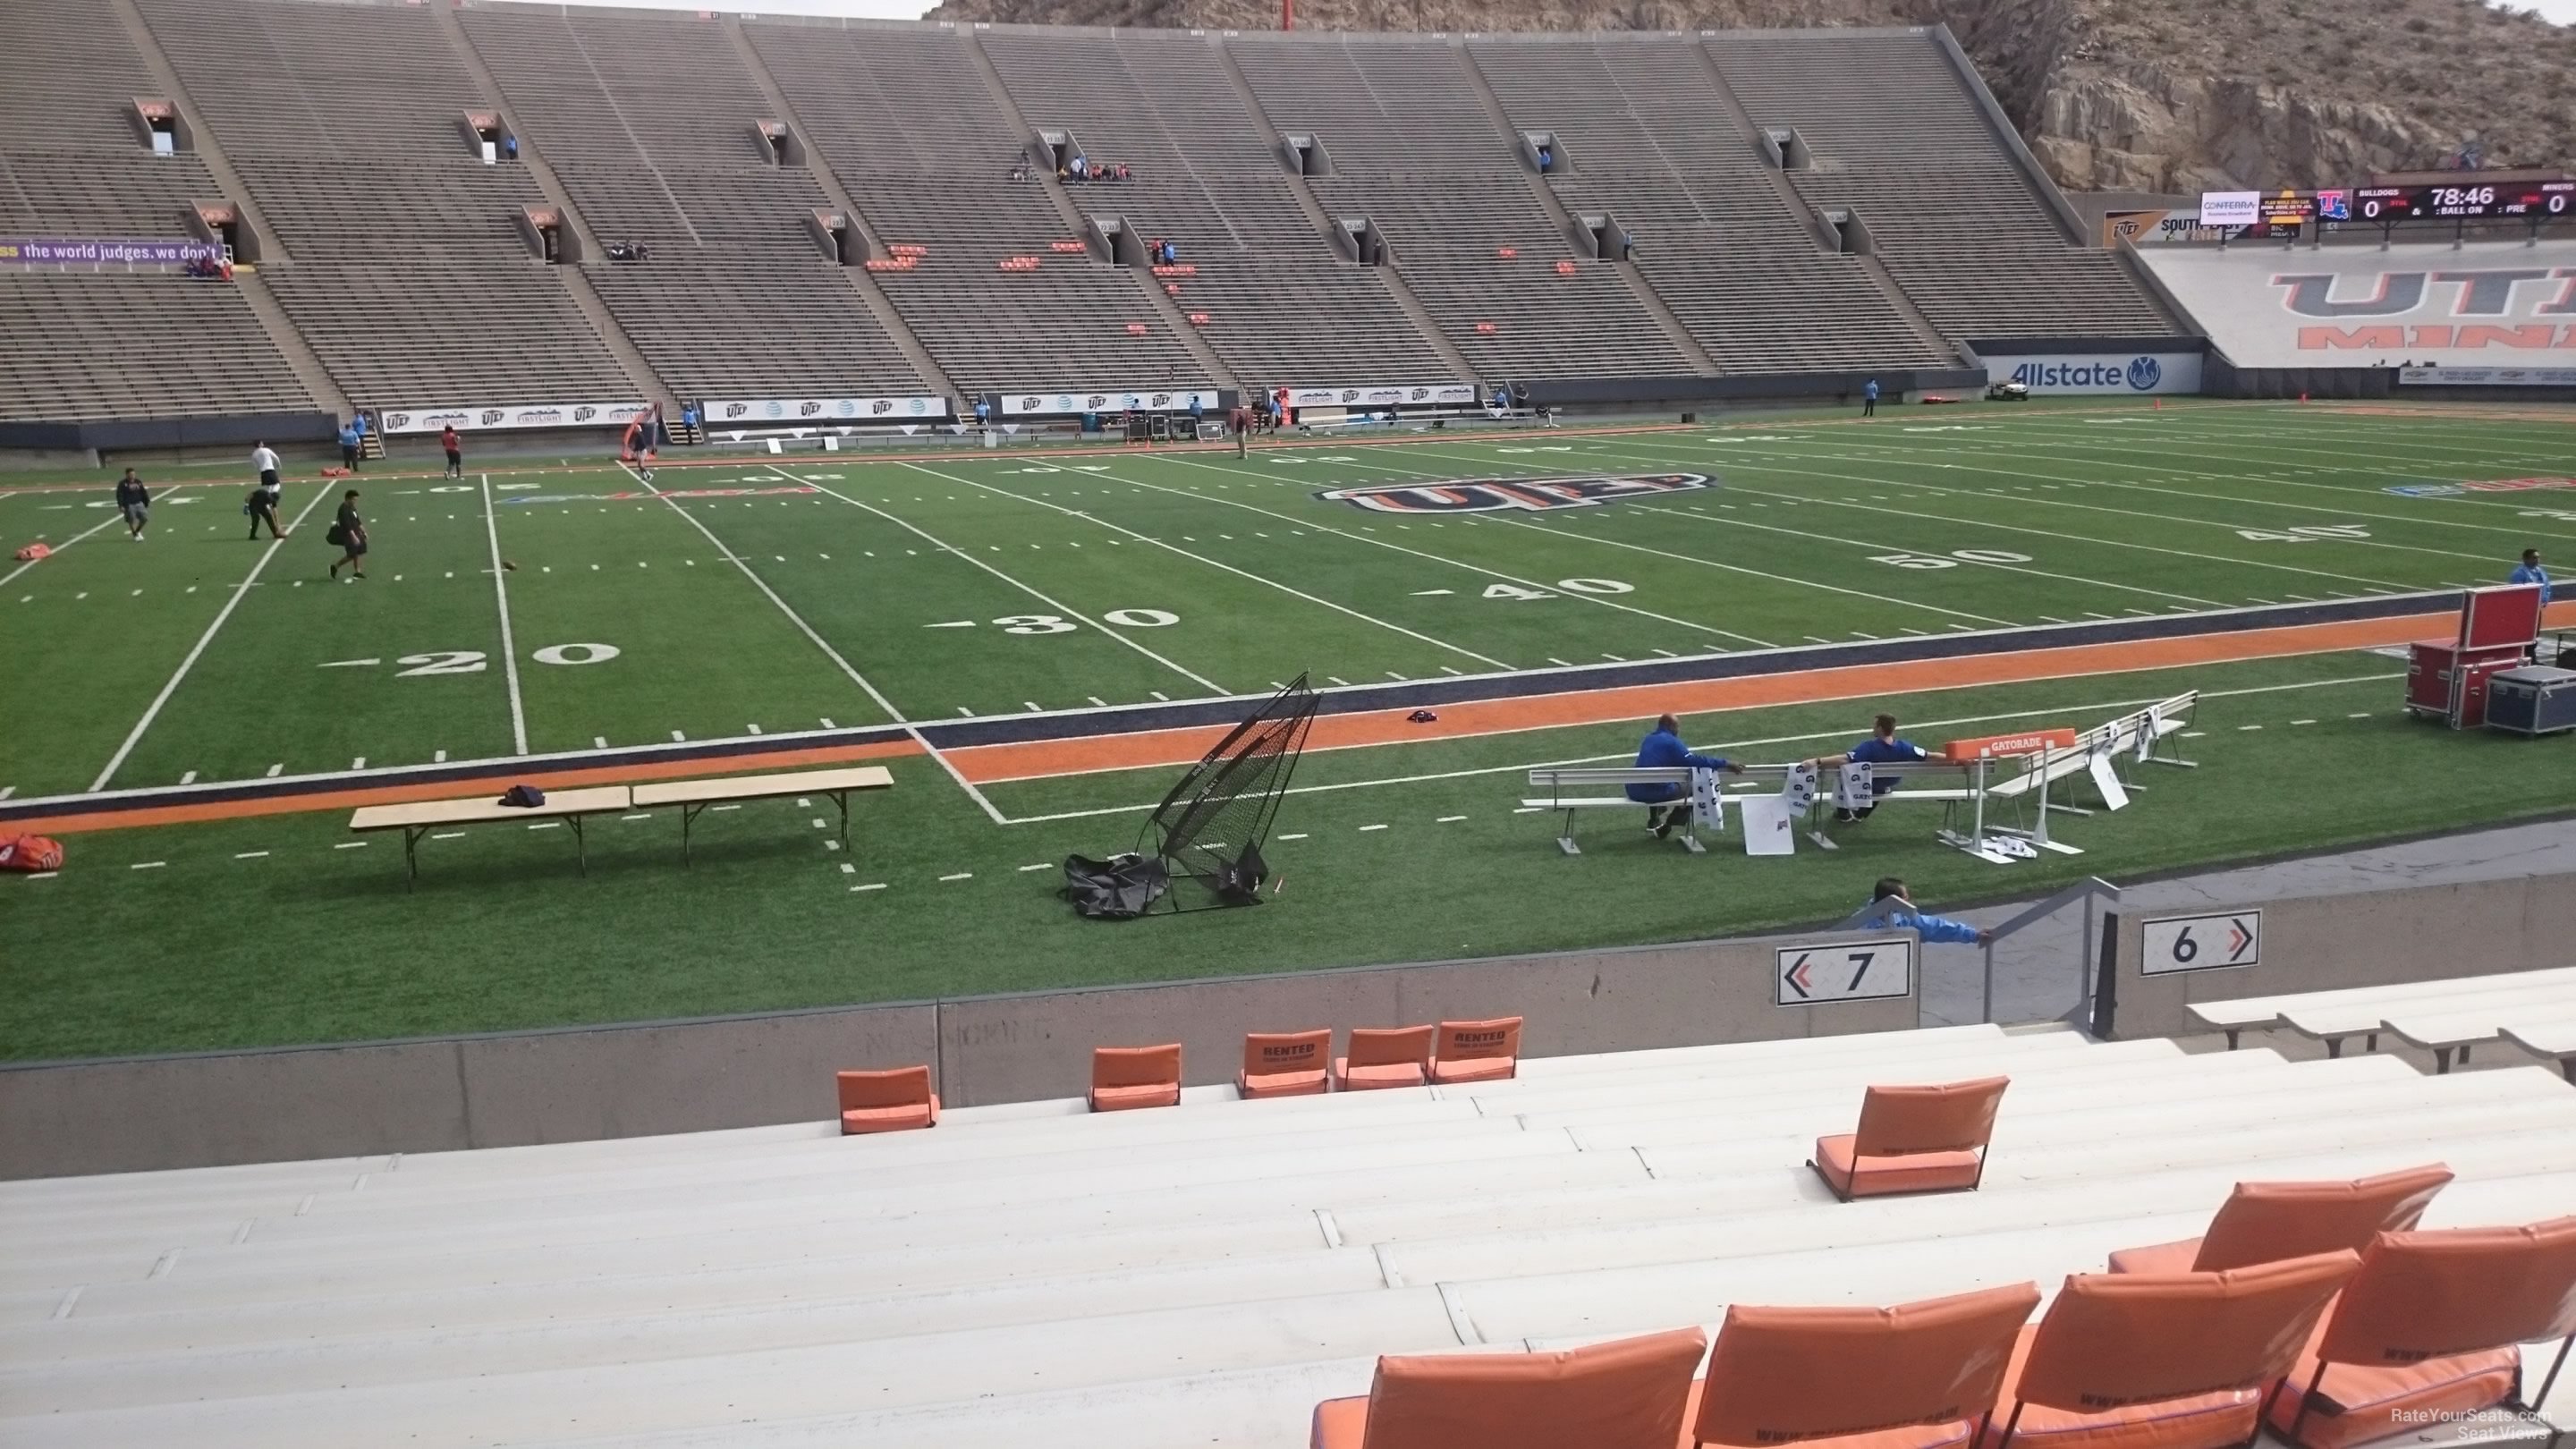 section 7, row 15 seat view  for football - sun bowl